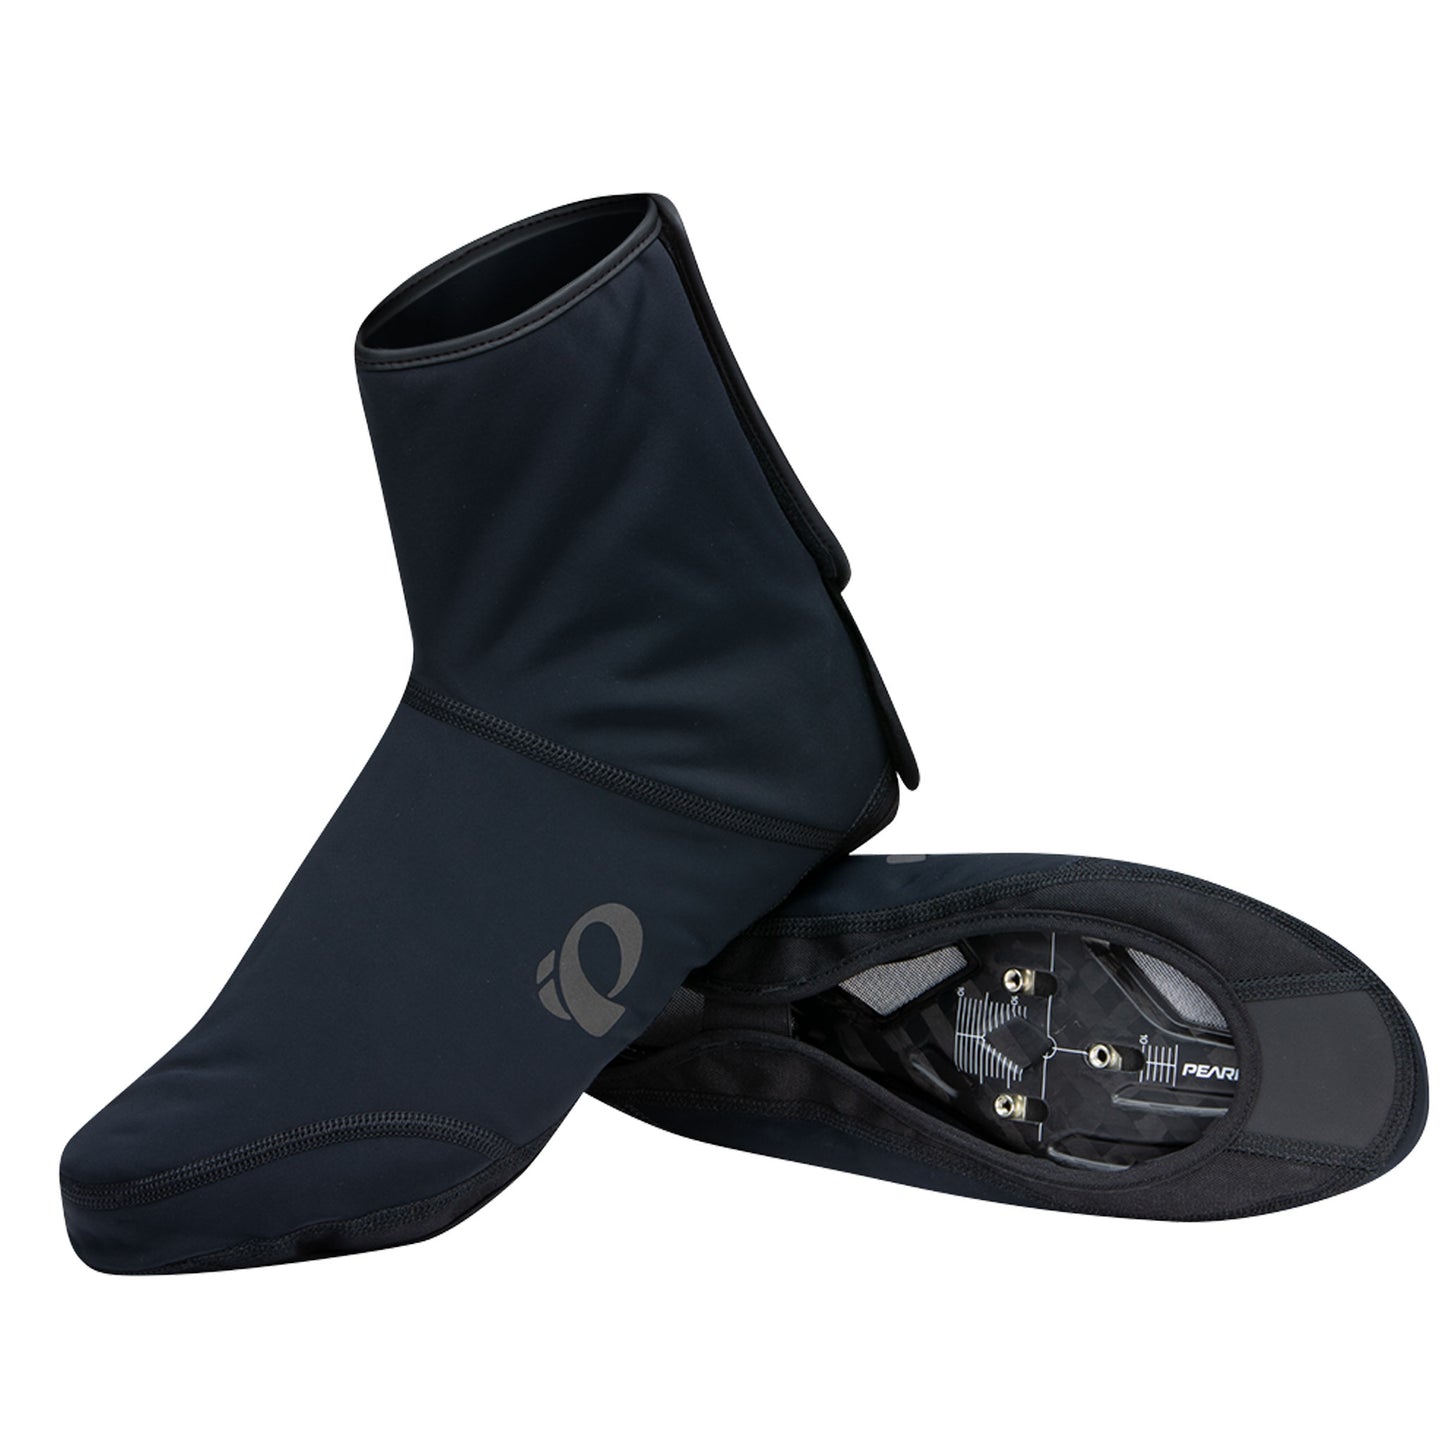 Pearl Izumi Amfib Shoes Covers - Black buy online at Woolys Wheels Sydney with free delivery